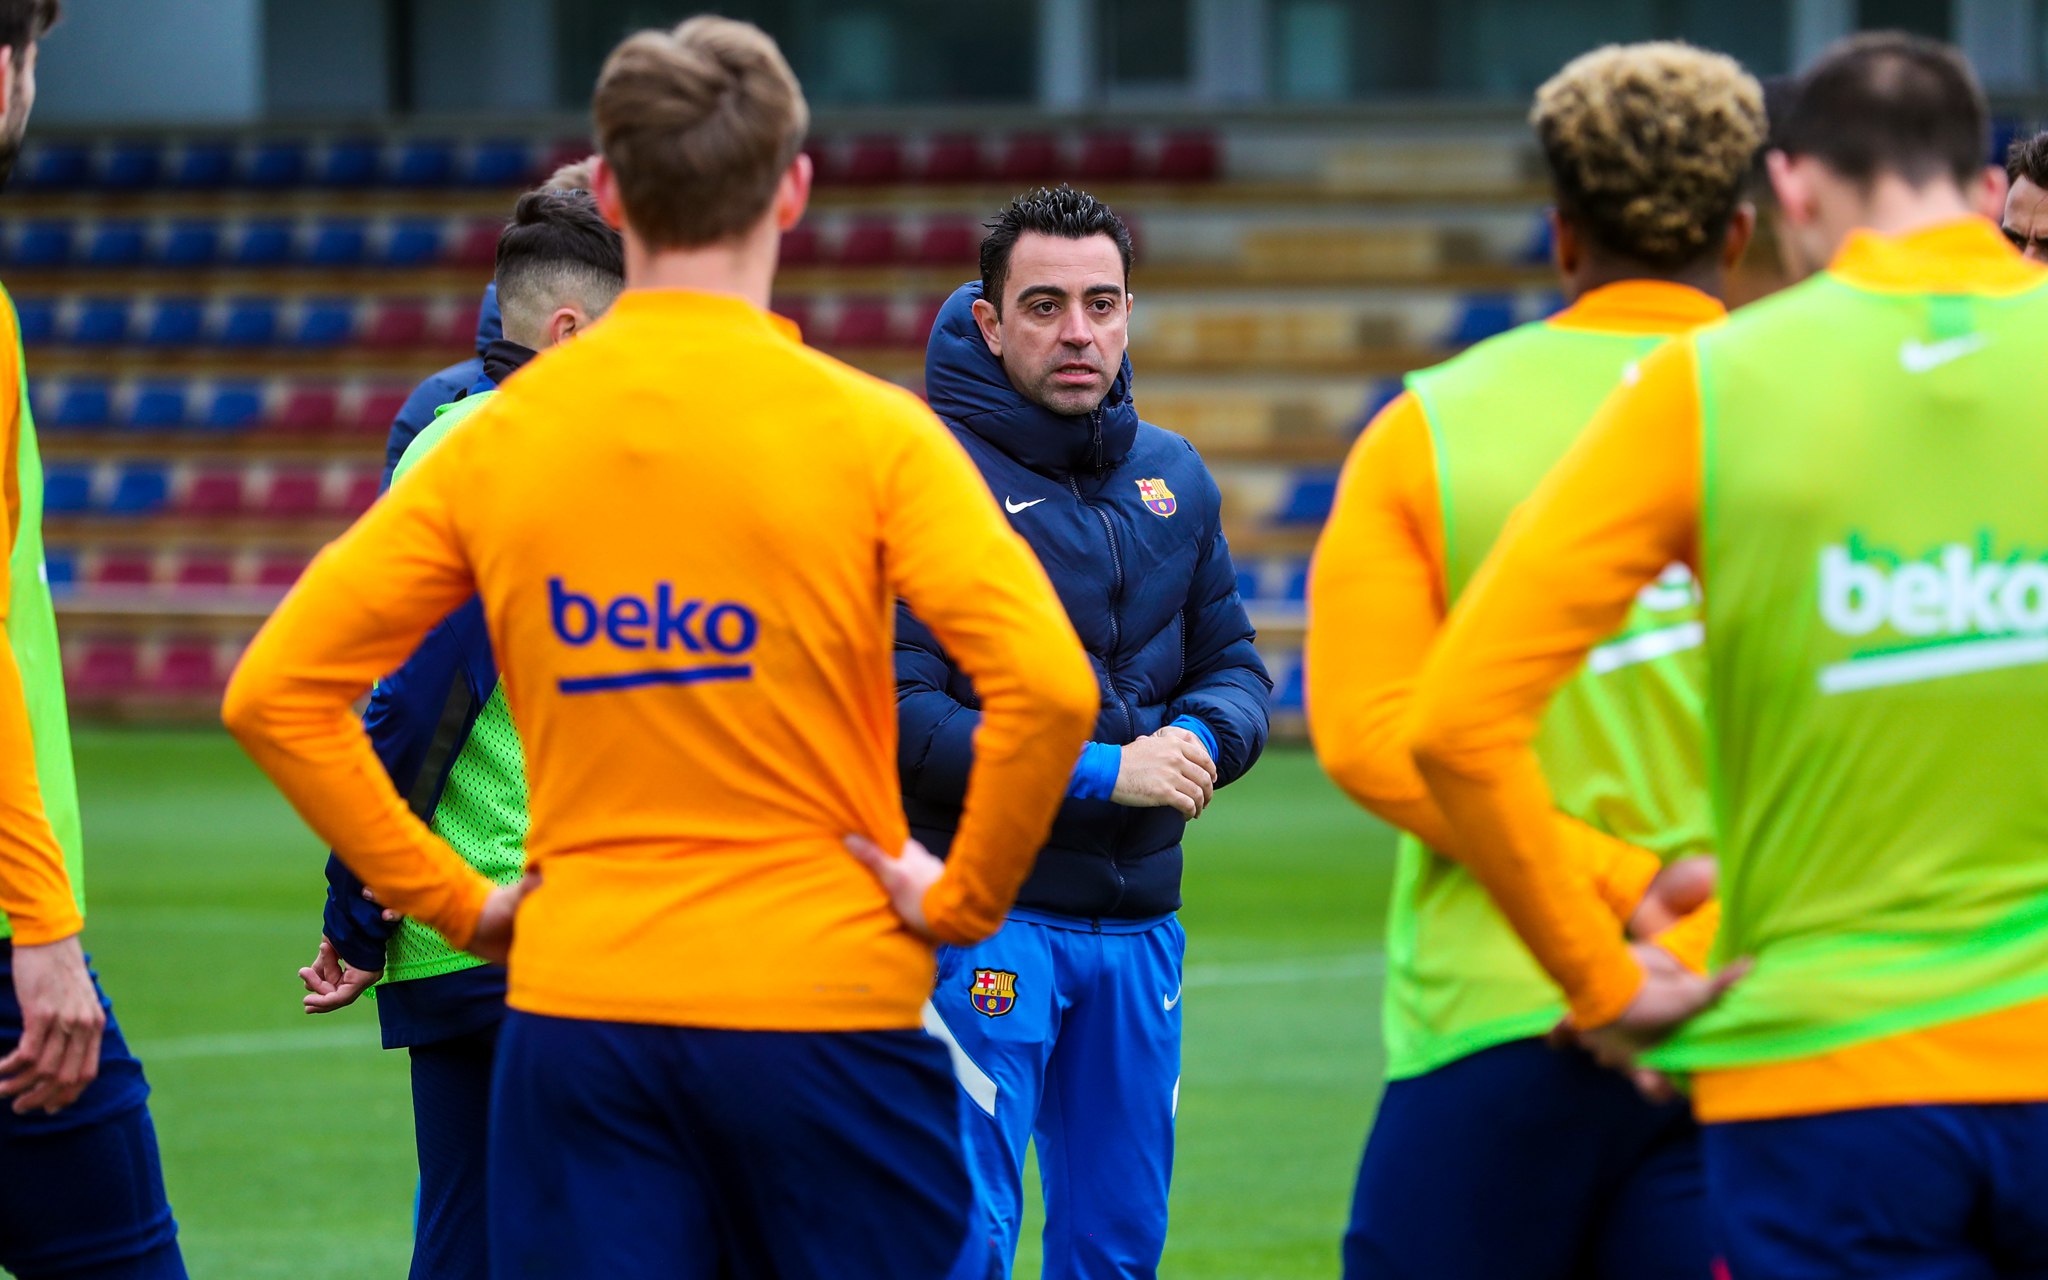 Improvement process is longer than we thought in Europe and that’s reality, asserts Xavi Hernandez